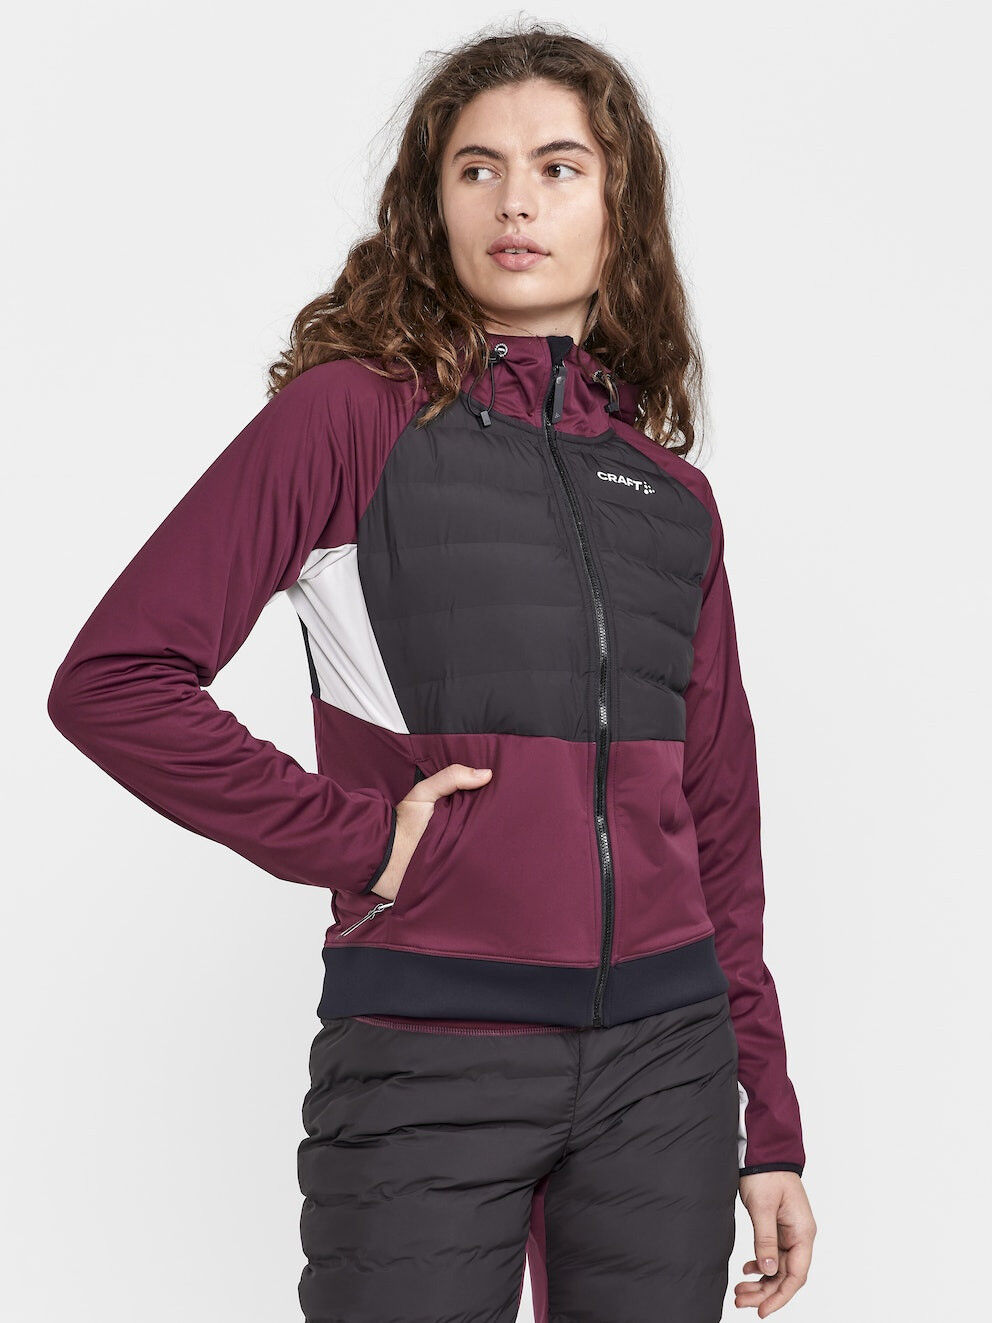 Craft Pursuit Thermal Jacket - Giacca da sci - Donna